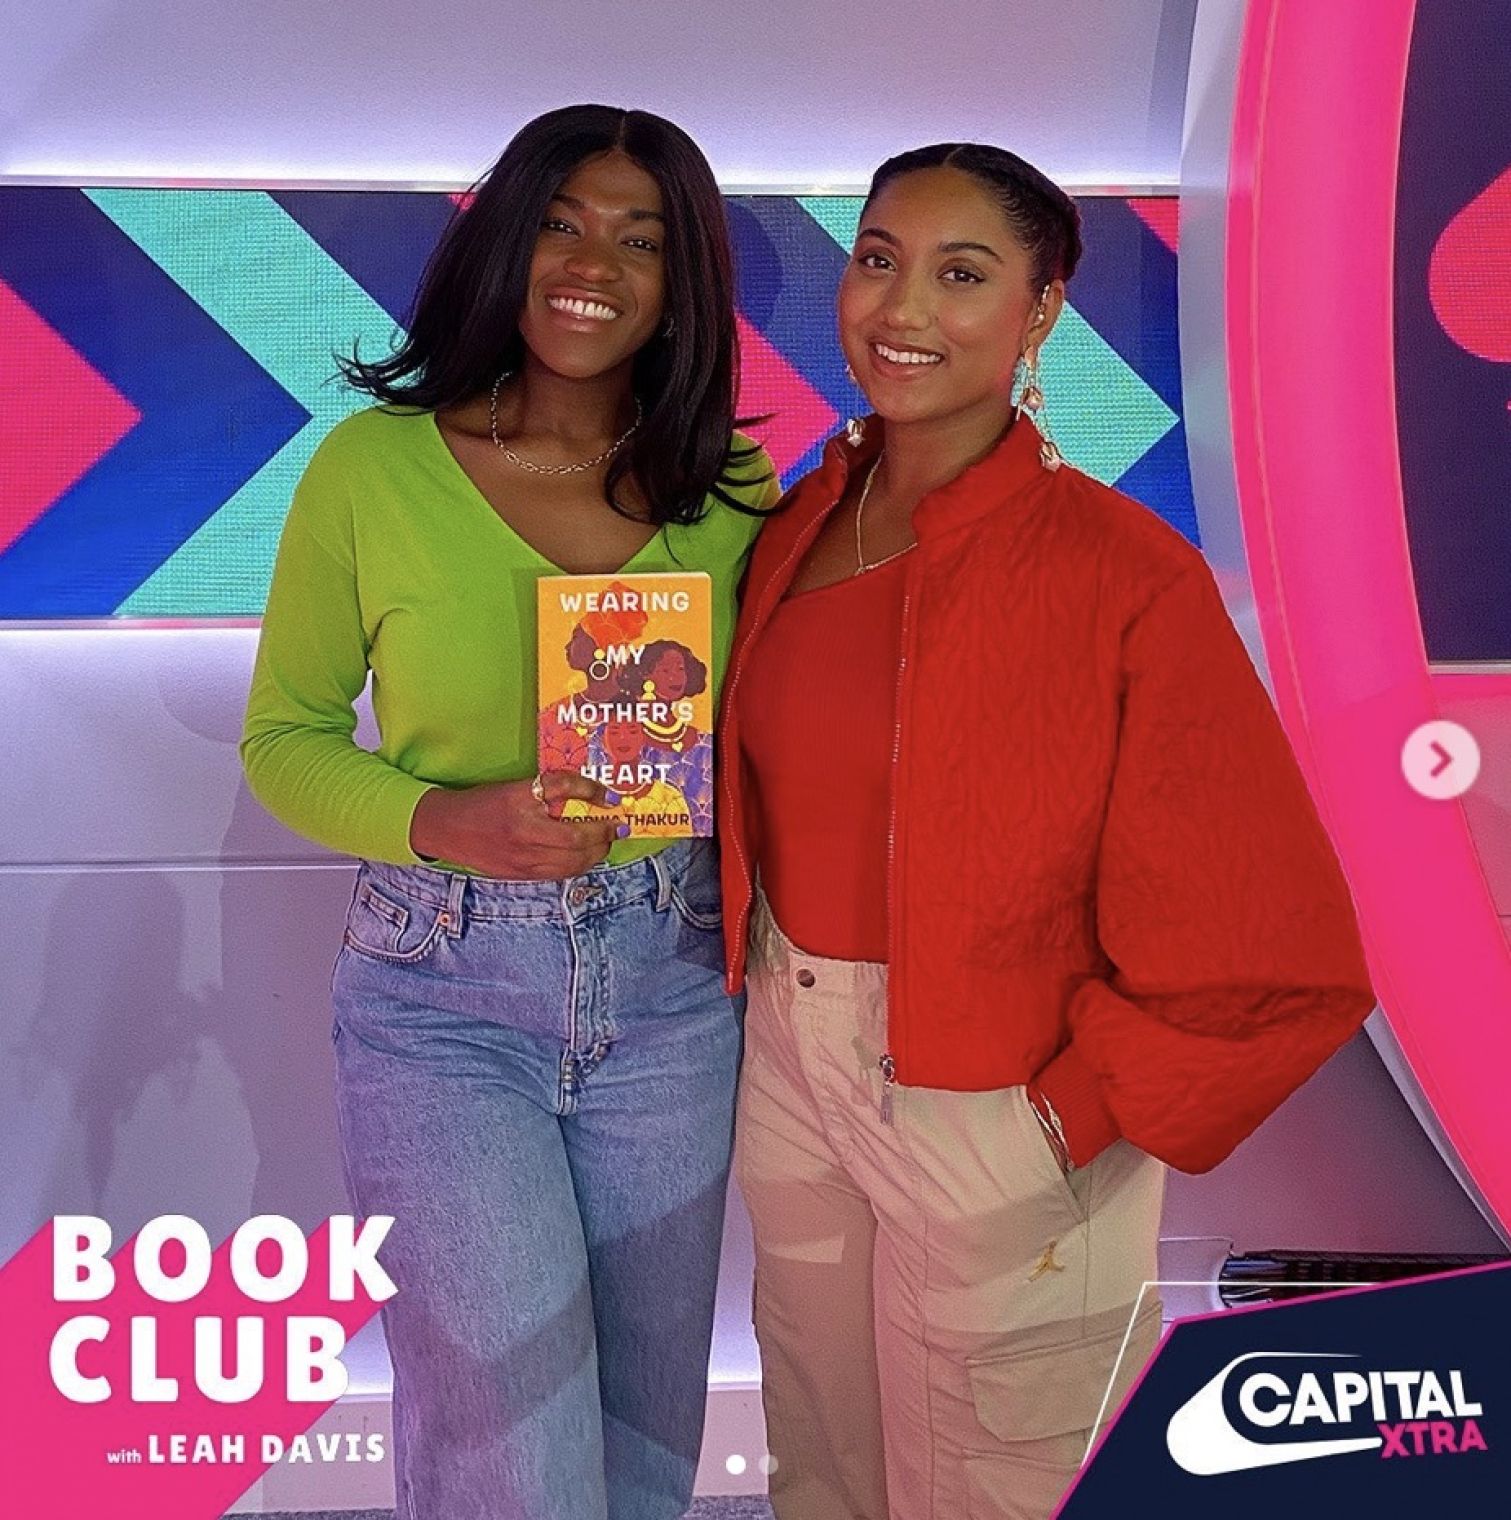 Sophia Thakur is this week's special guest on Leah Davis's Capital XTRA Book Club